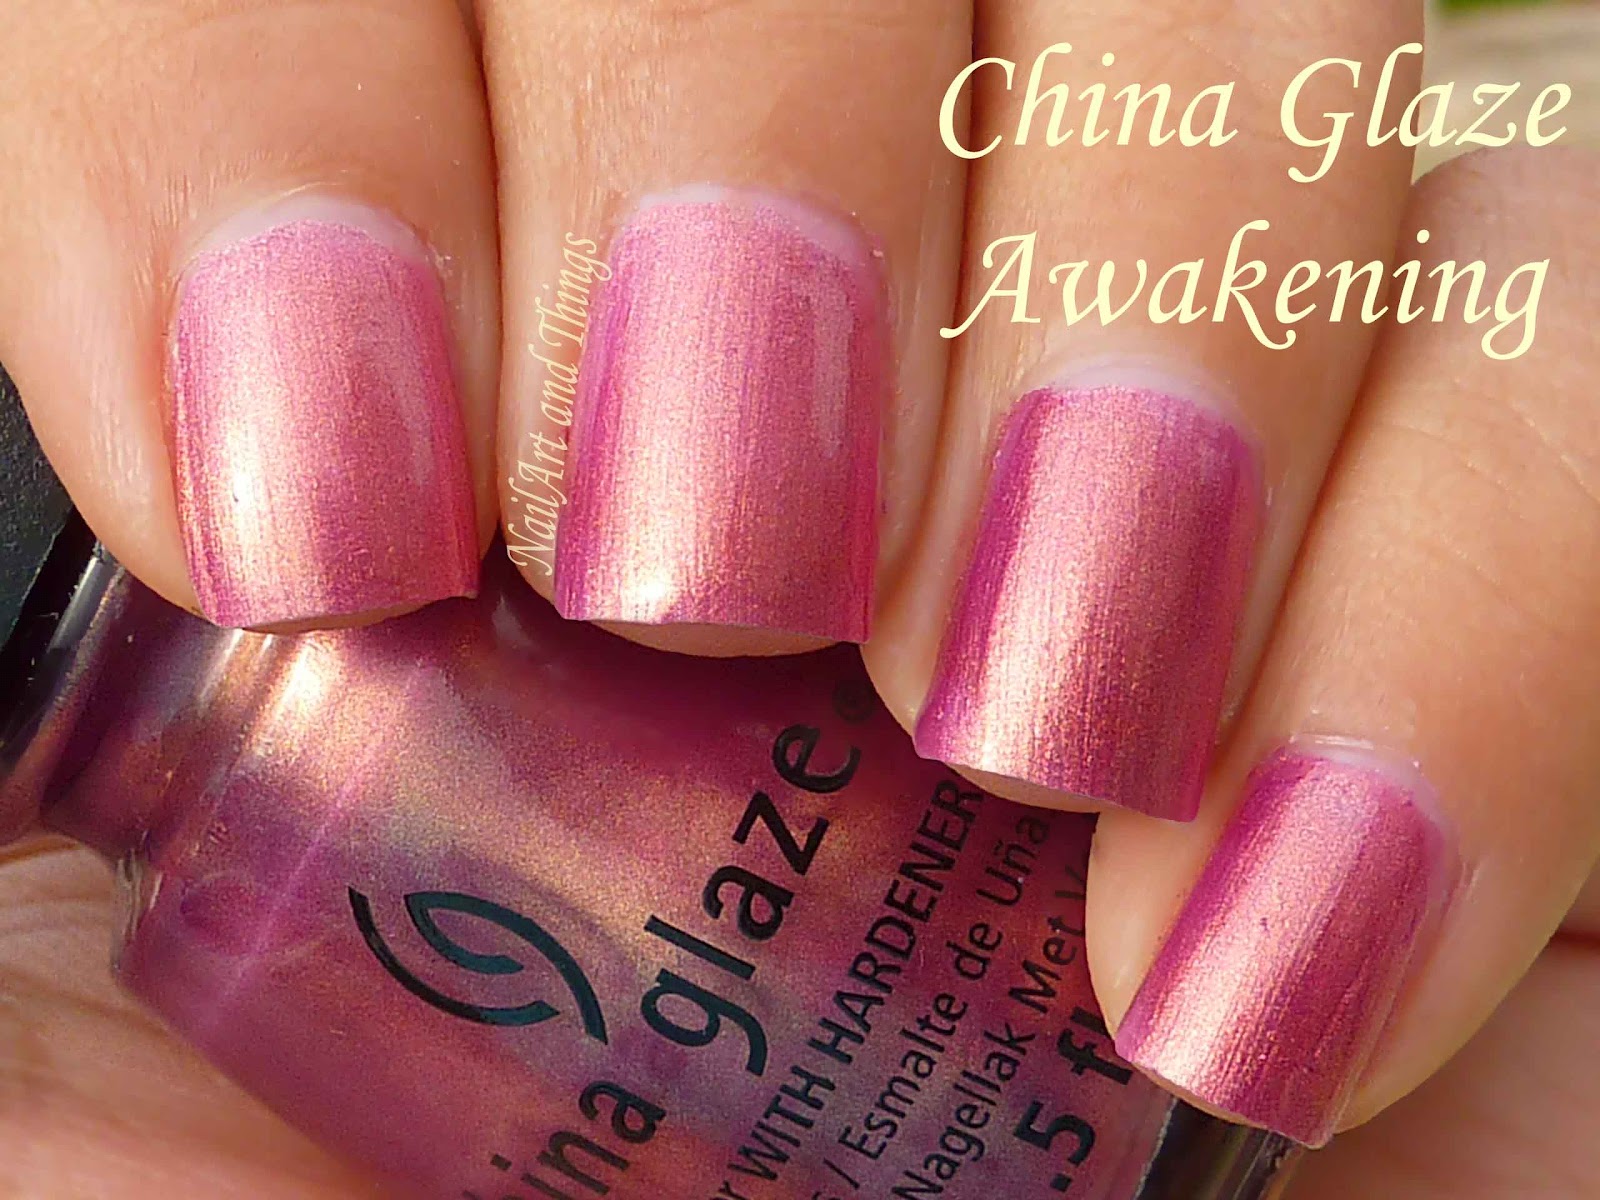 5. China Glaze Nail Lacquer in "Nude Awakening" - wide 2